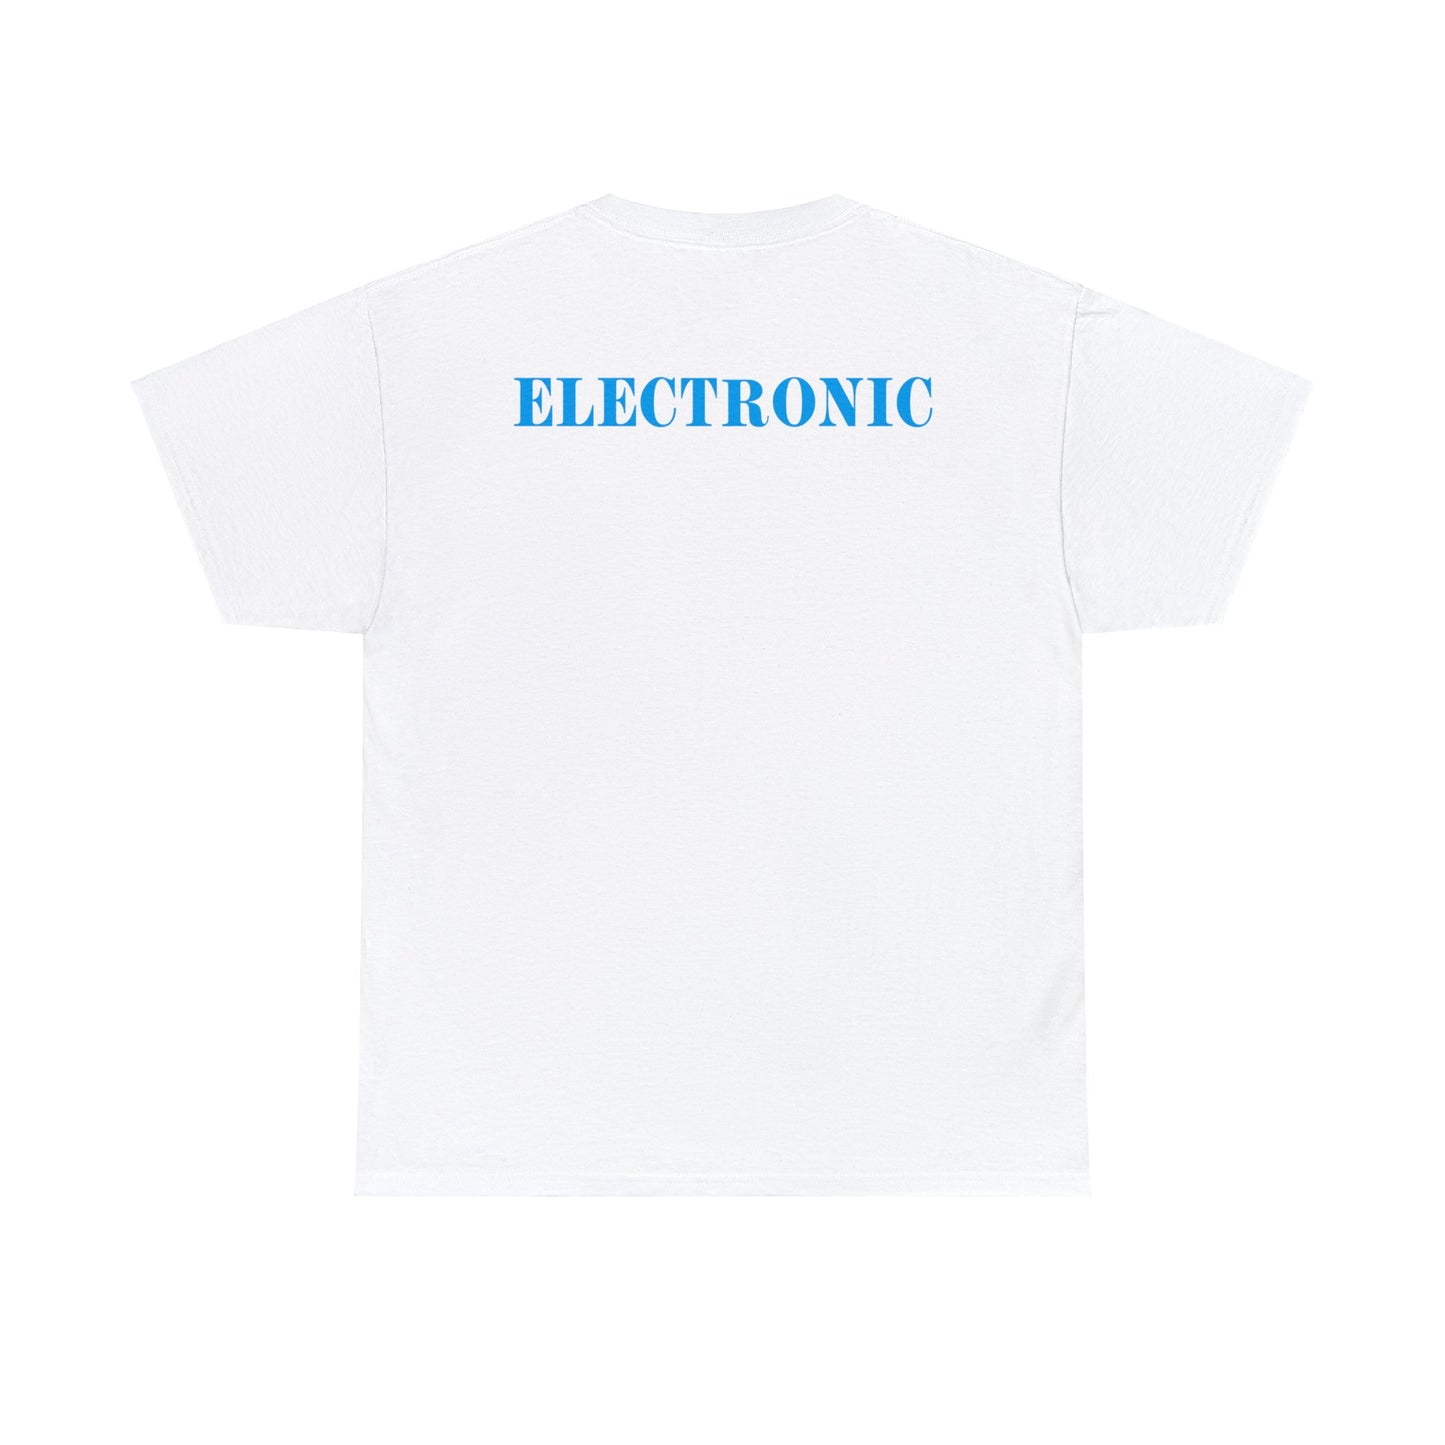 ELECTRONIC  NEW ORDER The Smiths 1990 T-shirt for Sale